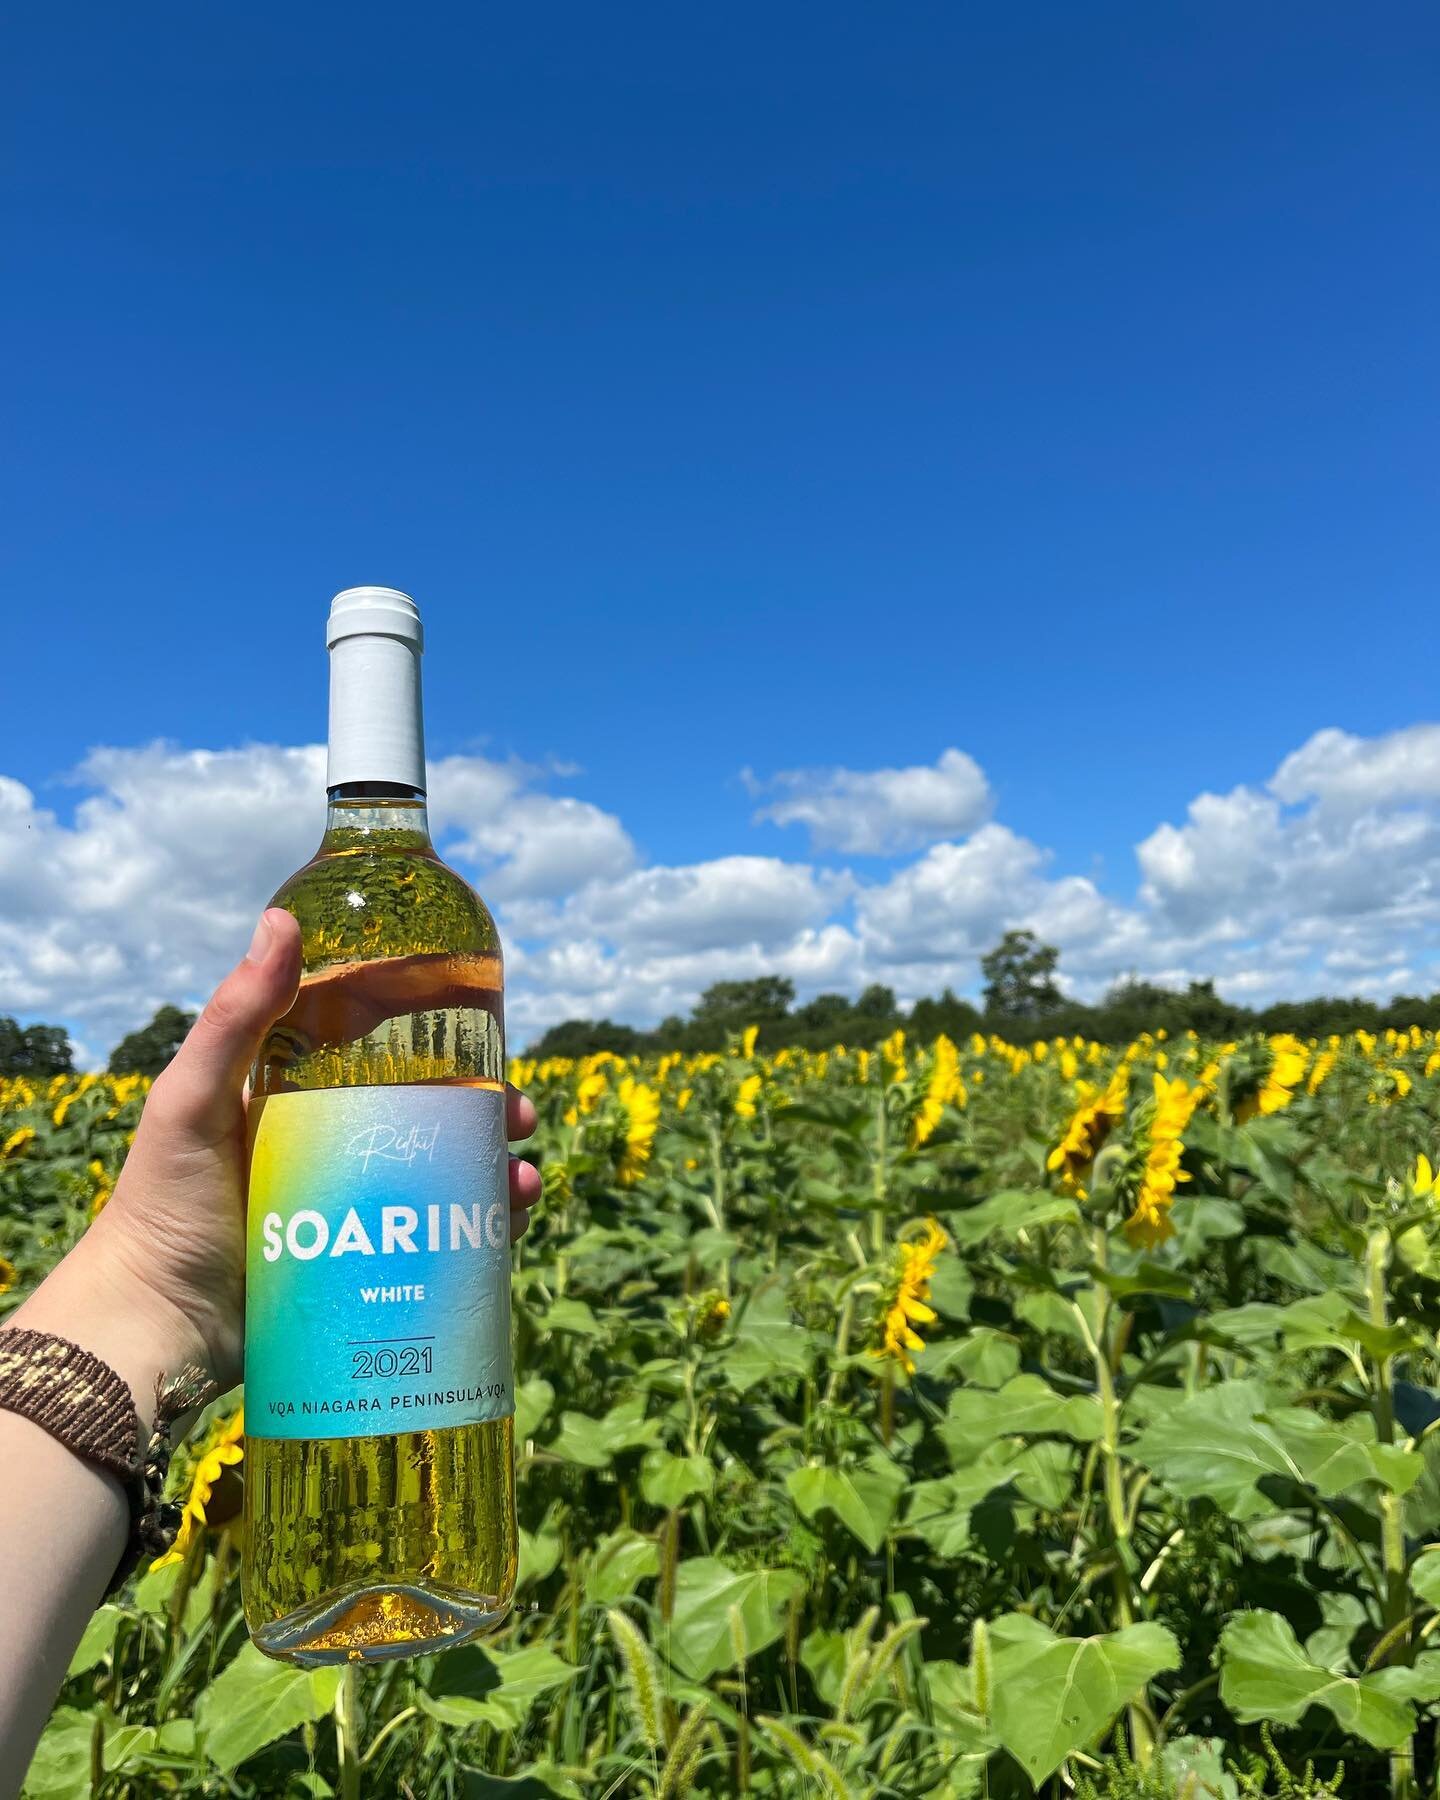 Happy Friday 🌻💛✨

Open all weekend for all your wine needs &amp; views of our sunflower field! 😍

Have you tried our Soarings yet? 🥂

#sunflowers #happyfriday #redtailvineyards #princeedwardcounty #fridayvibes #soaringseries #winelovers #pecwines